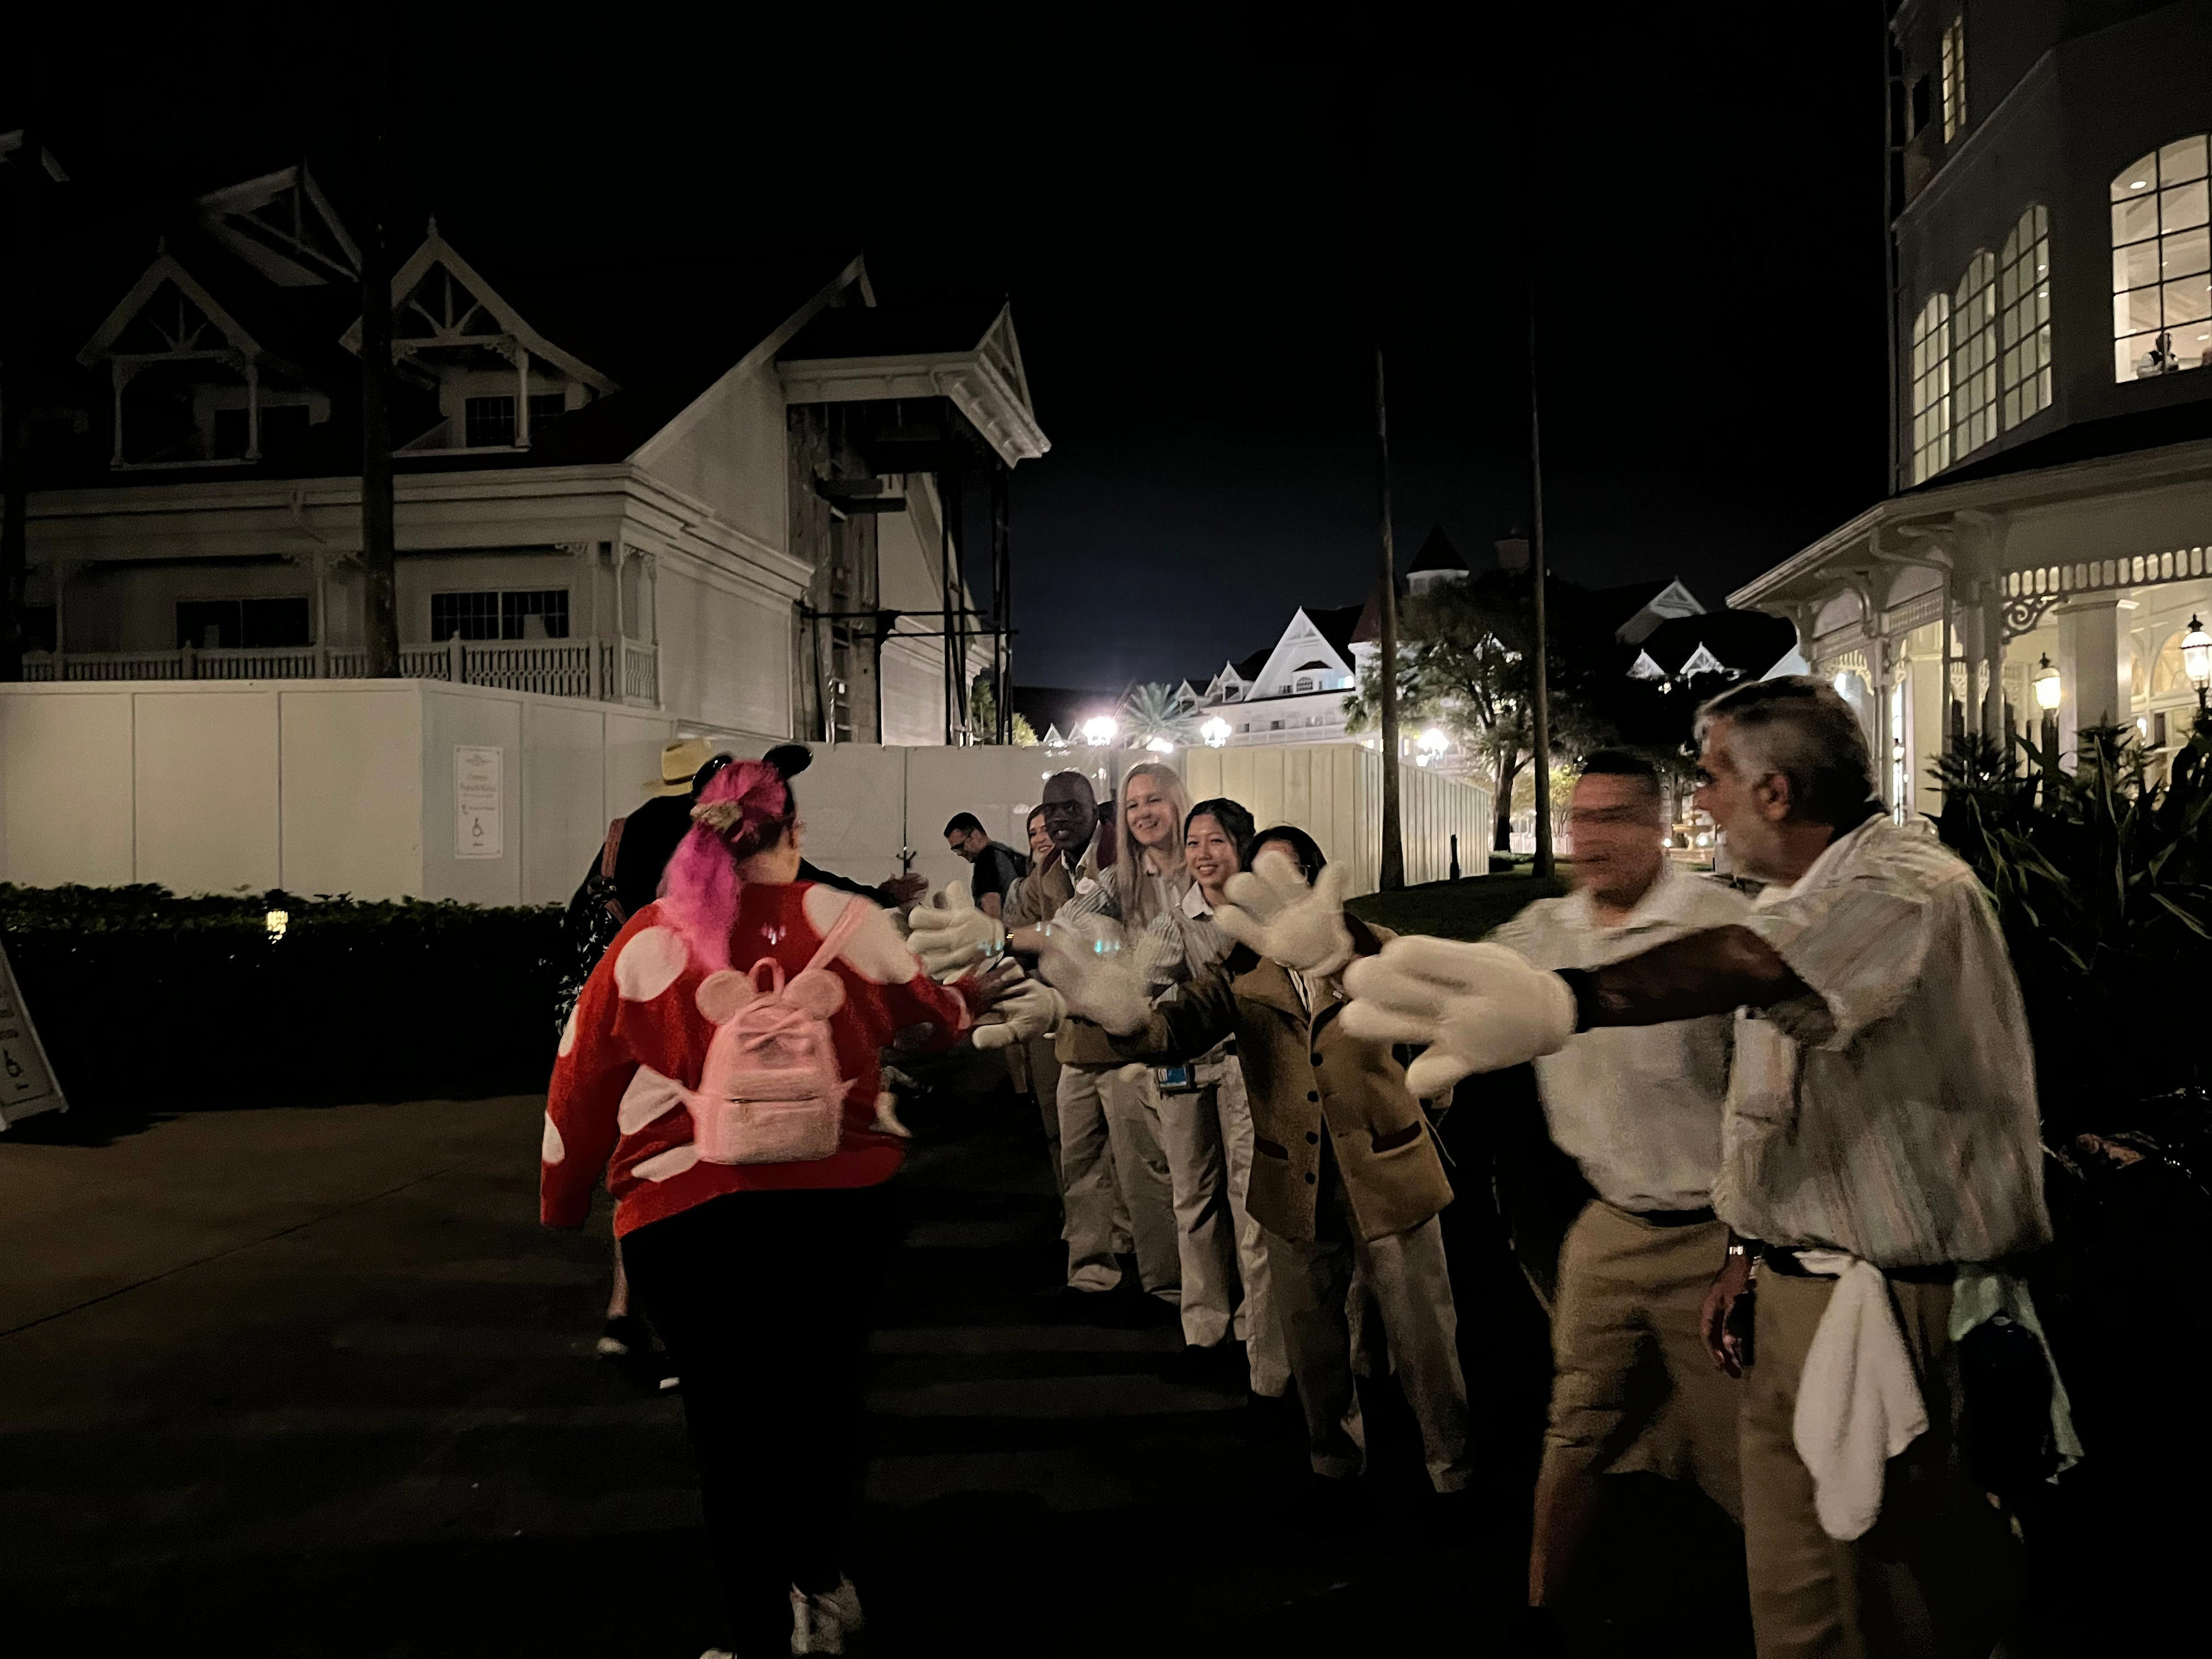 <p>When all of the guests were leaving the area, a group of hotel employees put on Mickey Mouse gloves and encouraged everyone to shake their hands while heading back inside.</p><p>It was such a magical moment that left everyone smiling on their way out.</p>